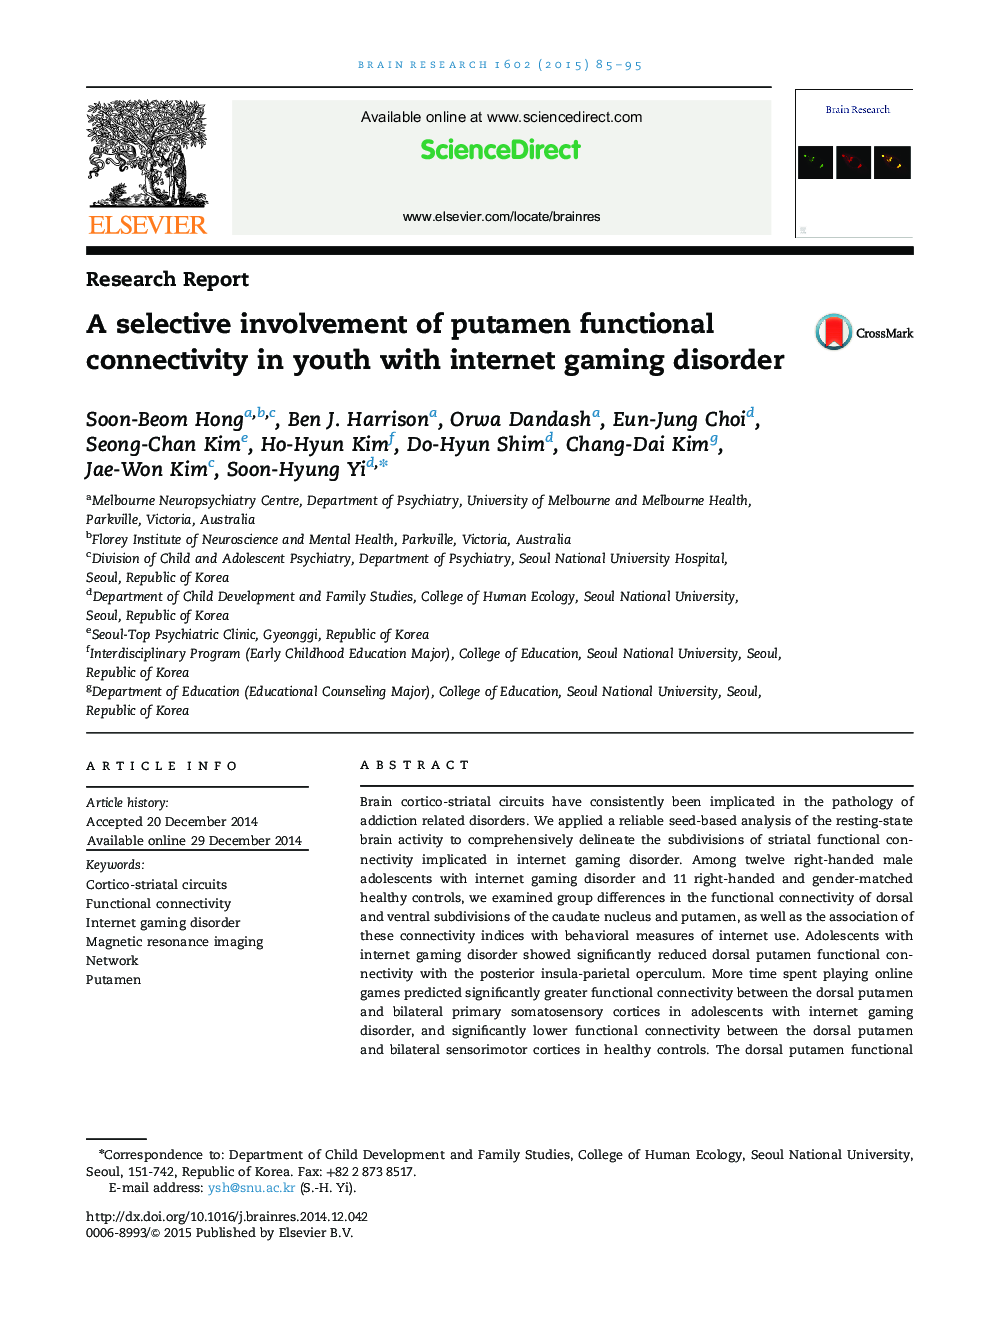 A selective involvement of putamen functional connectivity in youth with internet gaming disorder